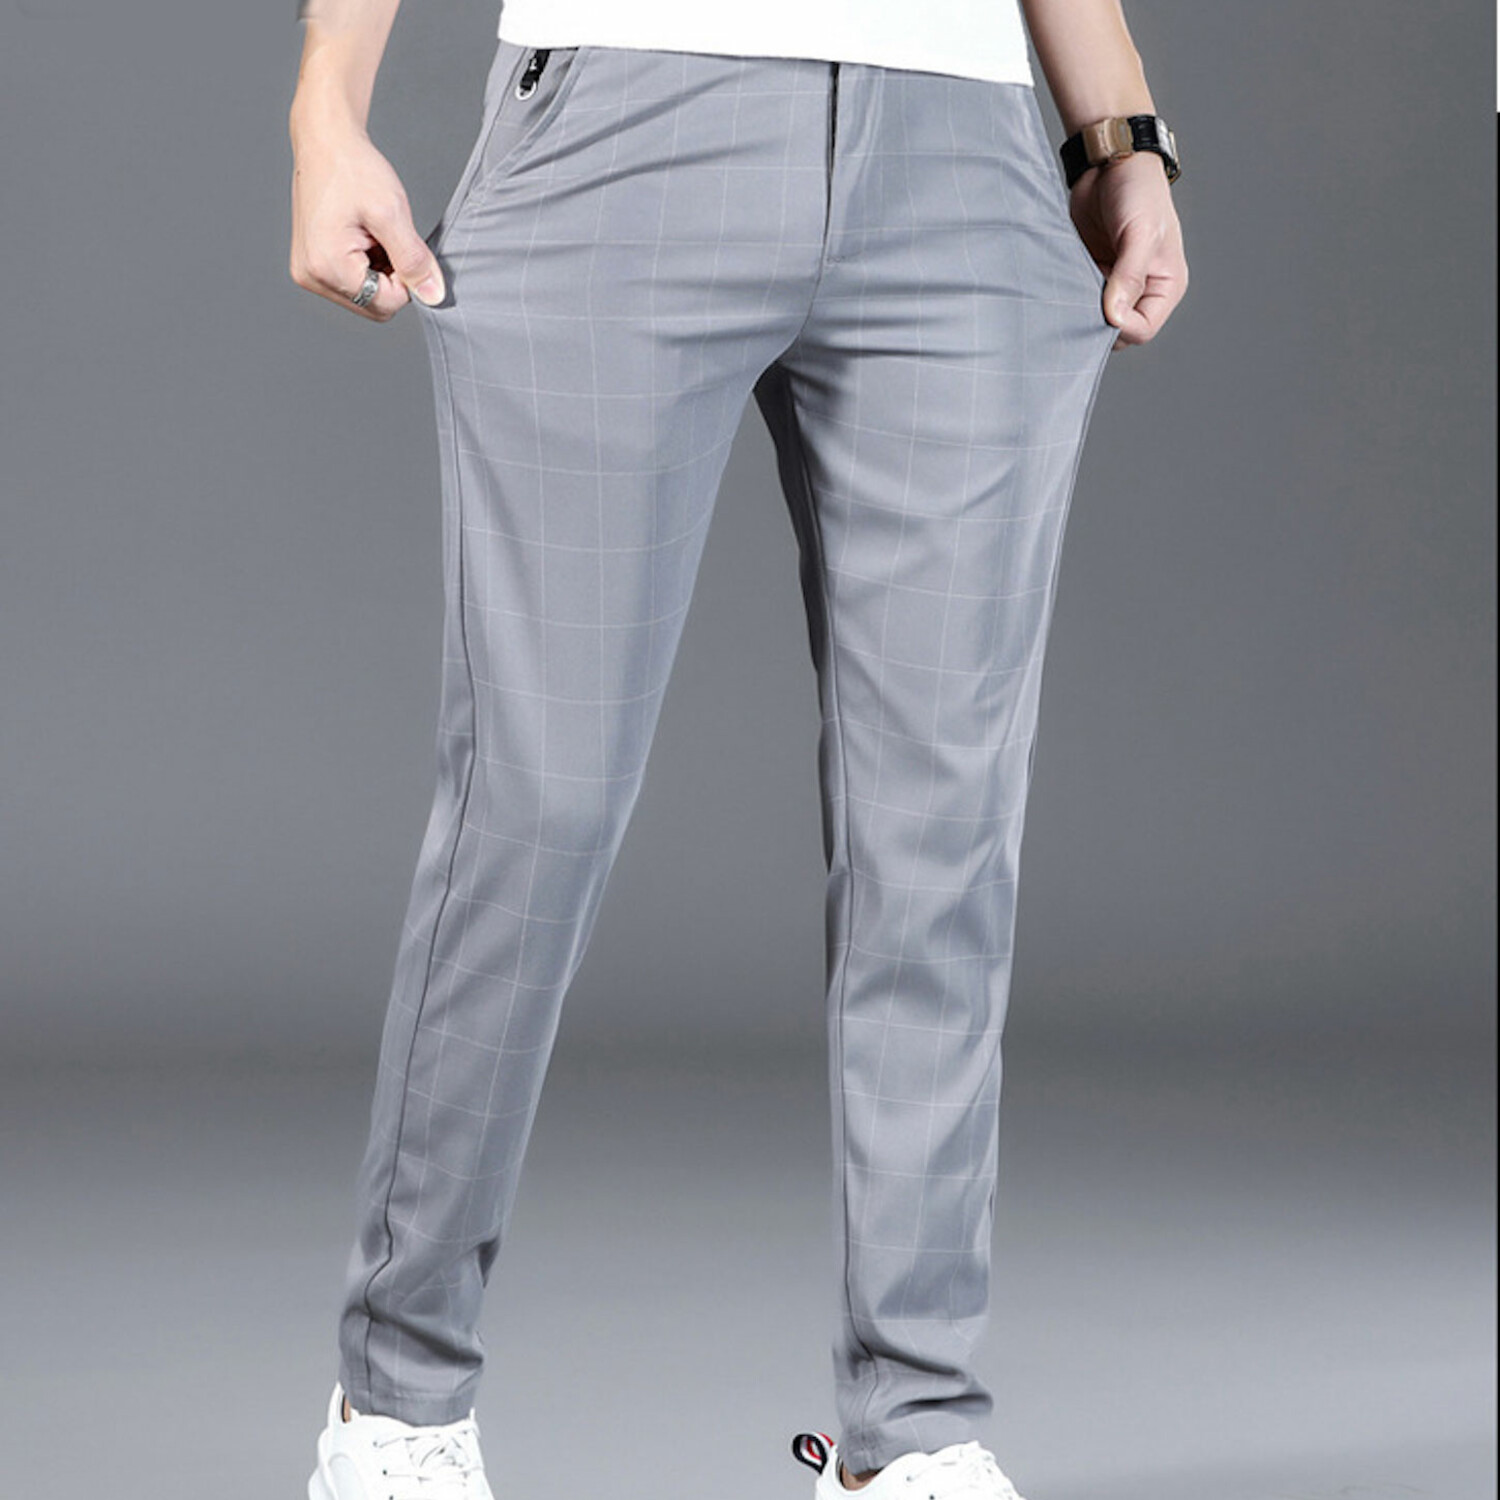 Wide Grid Print Slim Fit Pants // Light Gray (28) - Amedeo Exclusive ...